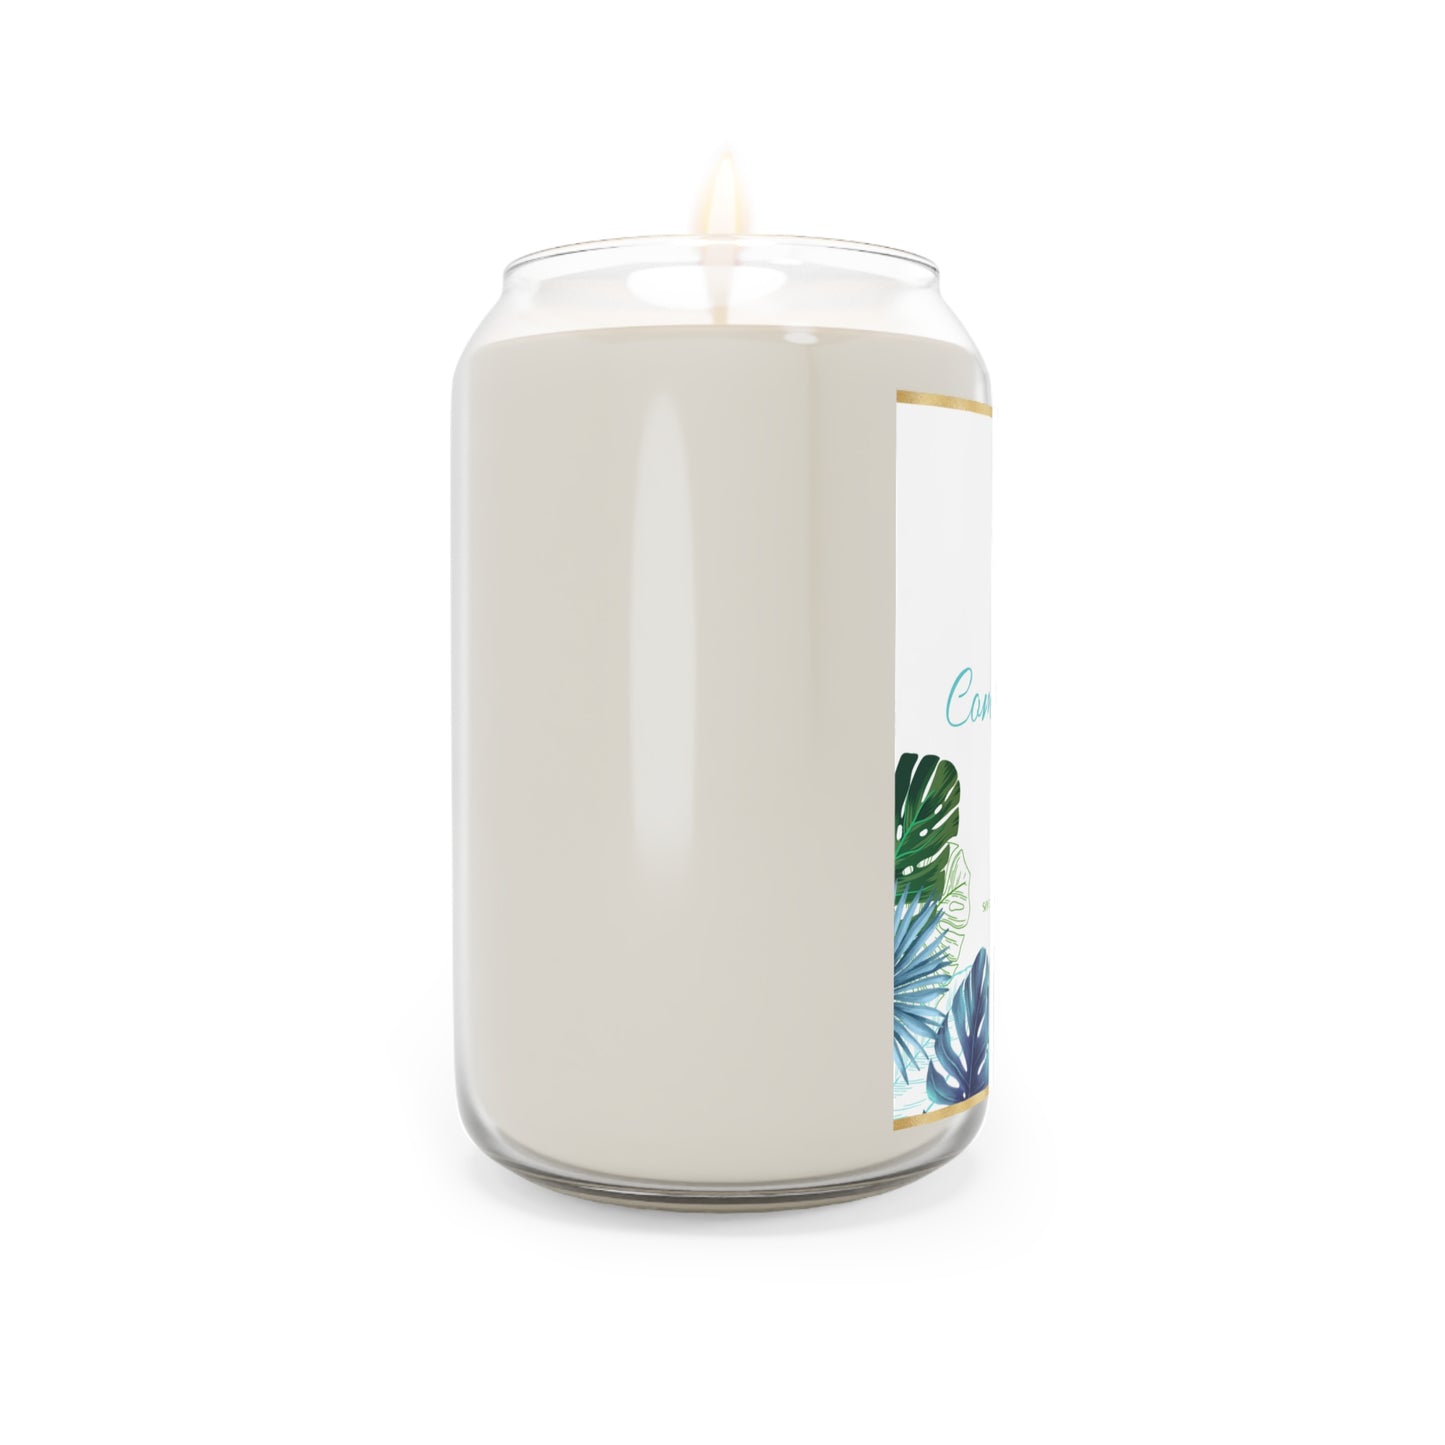 Comfort Spice Soy Candle